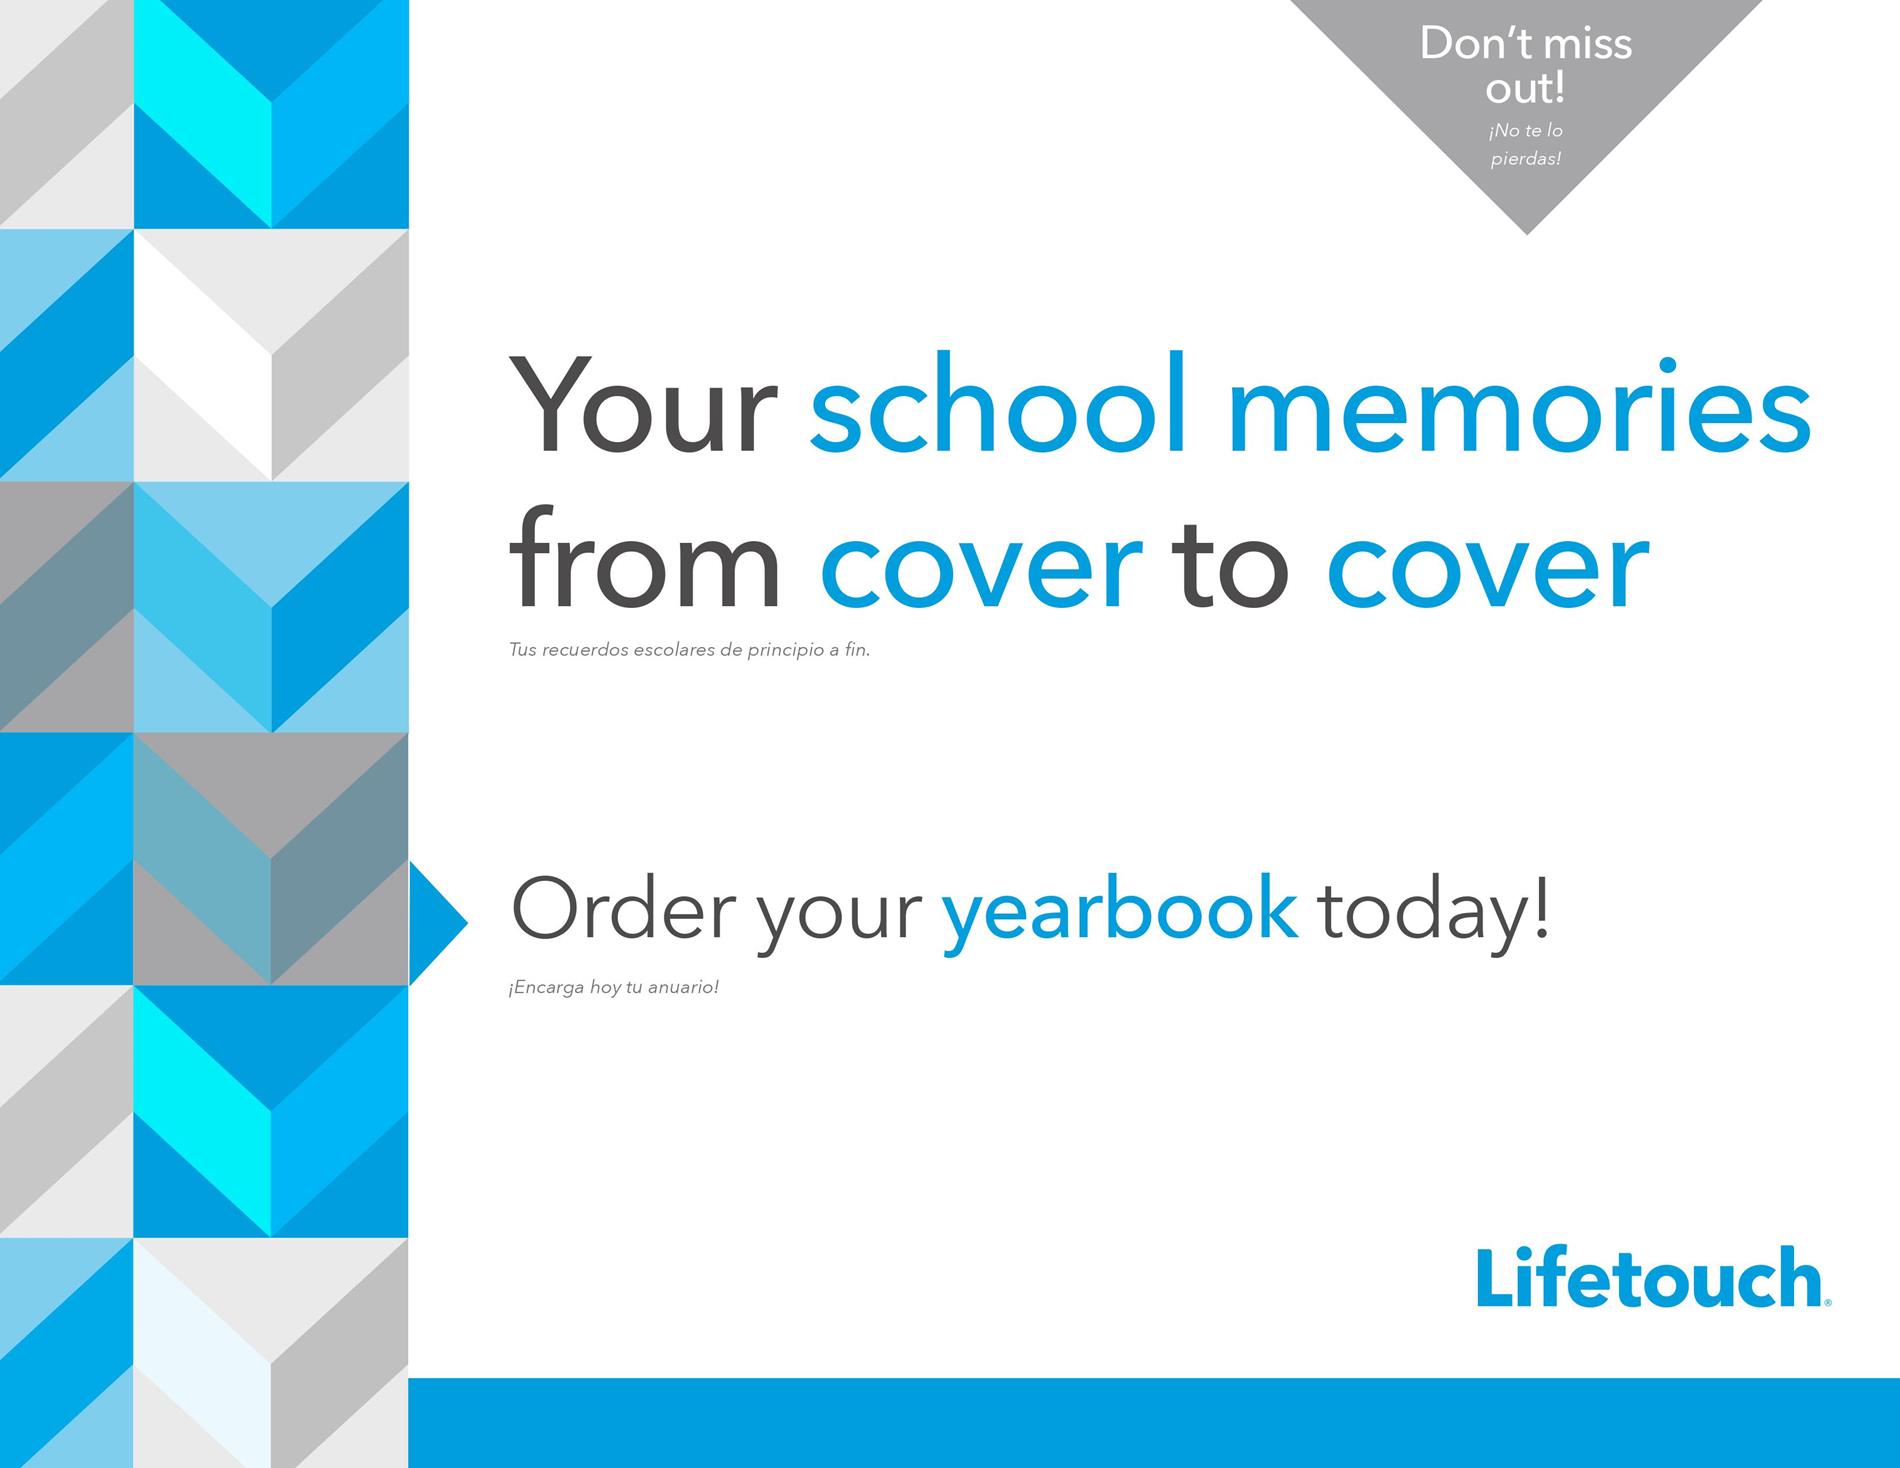 Lifetouch Banner - Order your yearbook today!